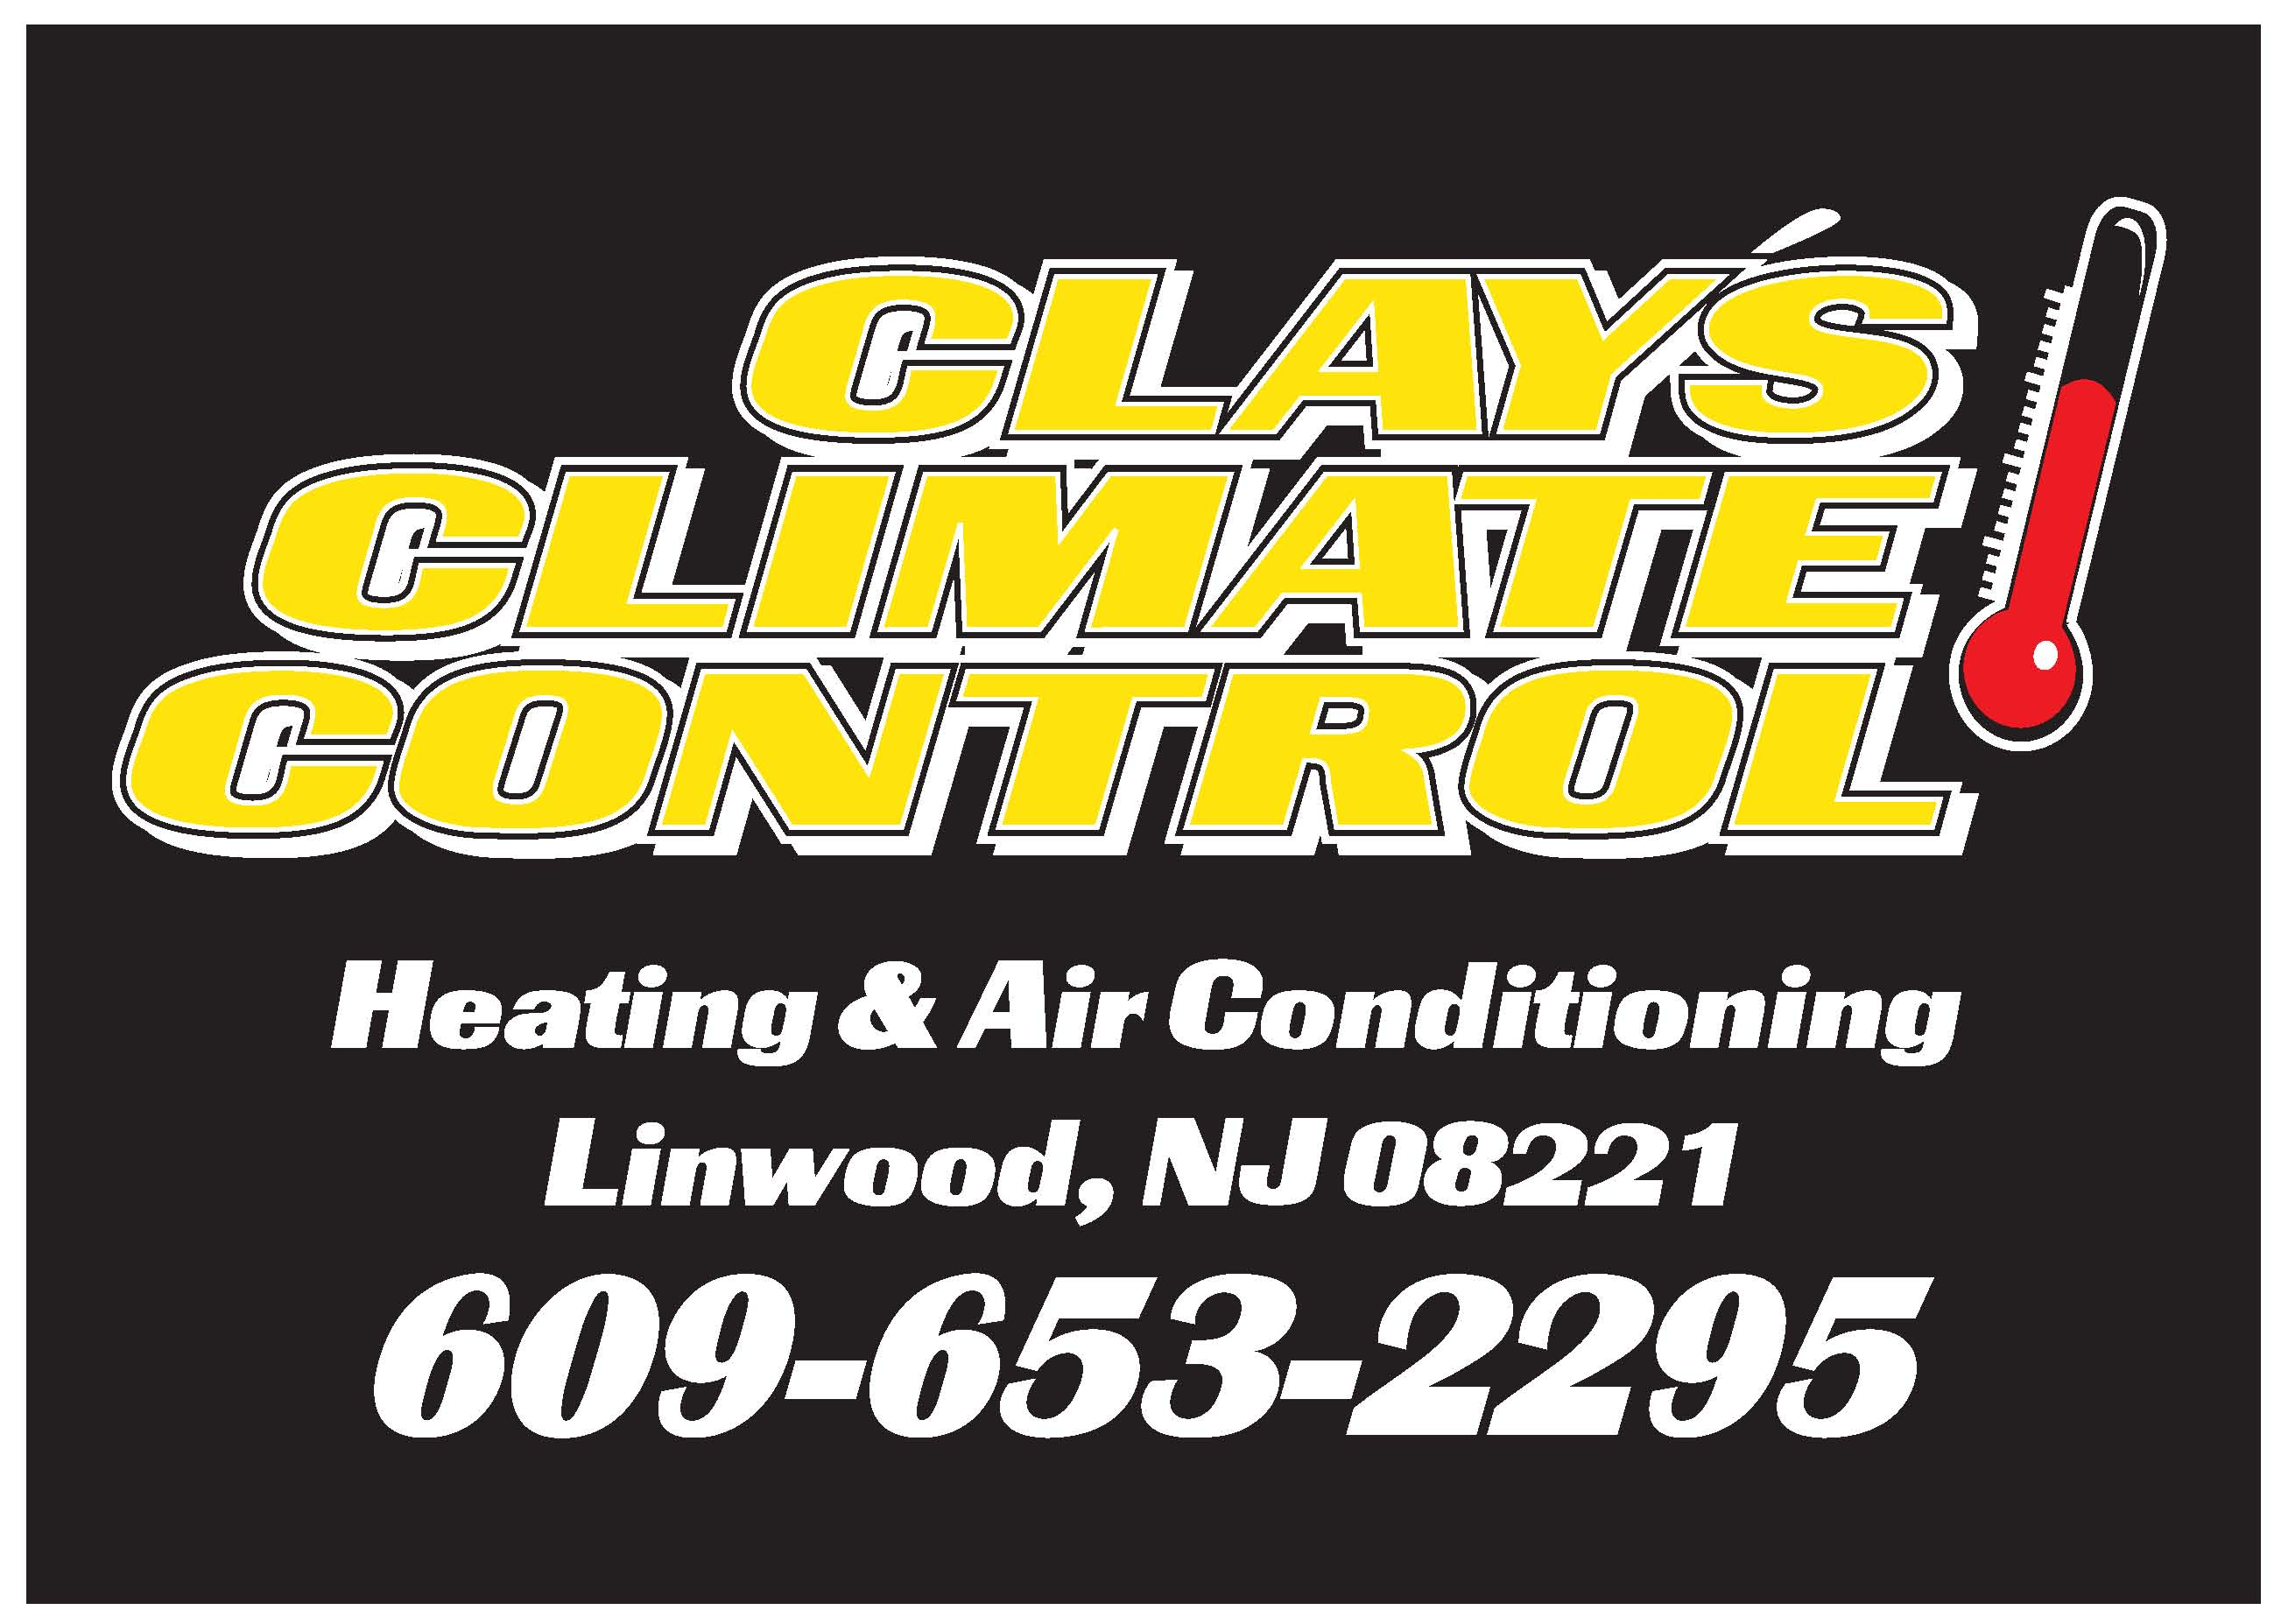 Clay's Climate Control Logo